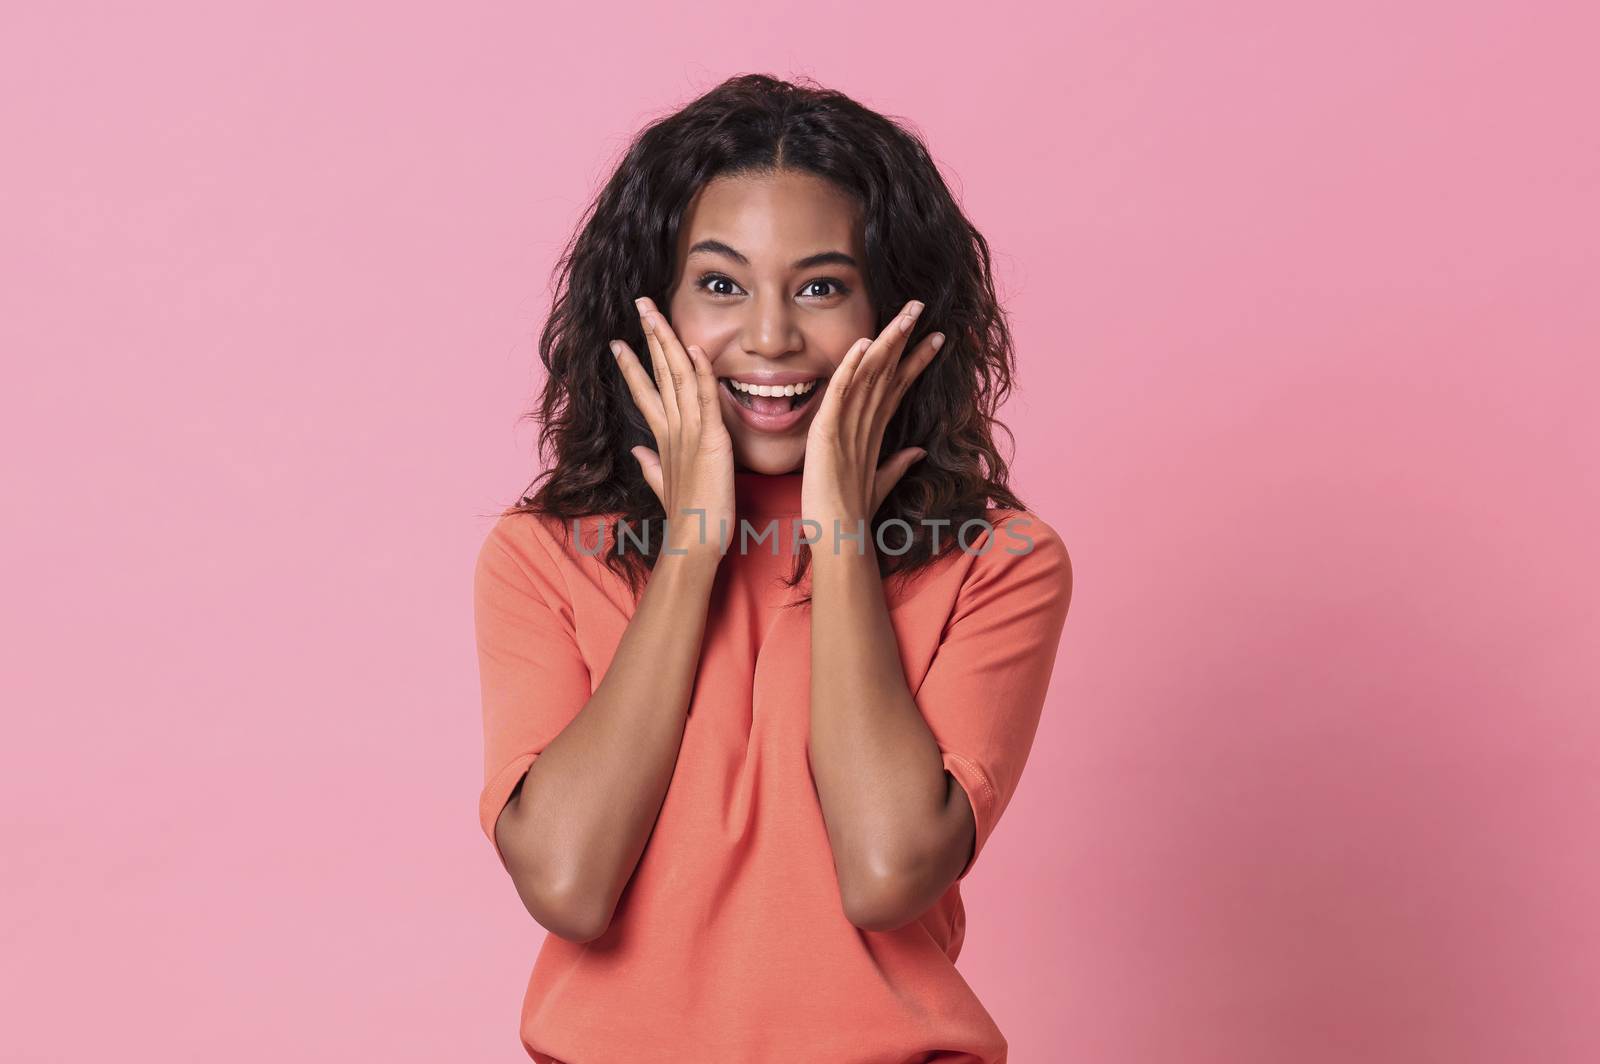 Shocked excited beautiful african woman with mouth open wearing casual orange t-shirt isolated on pink background.